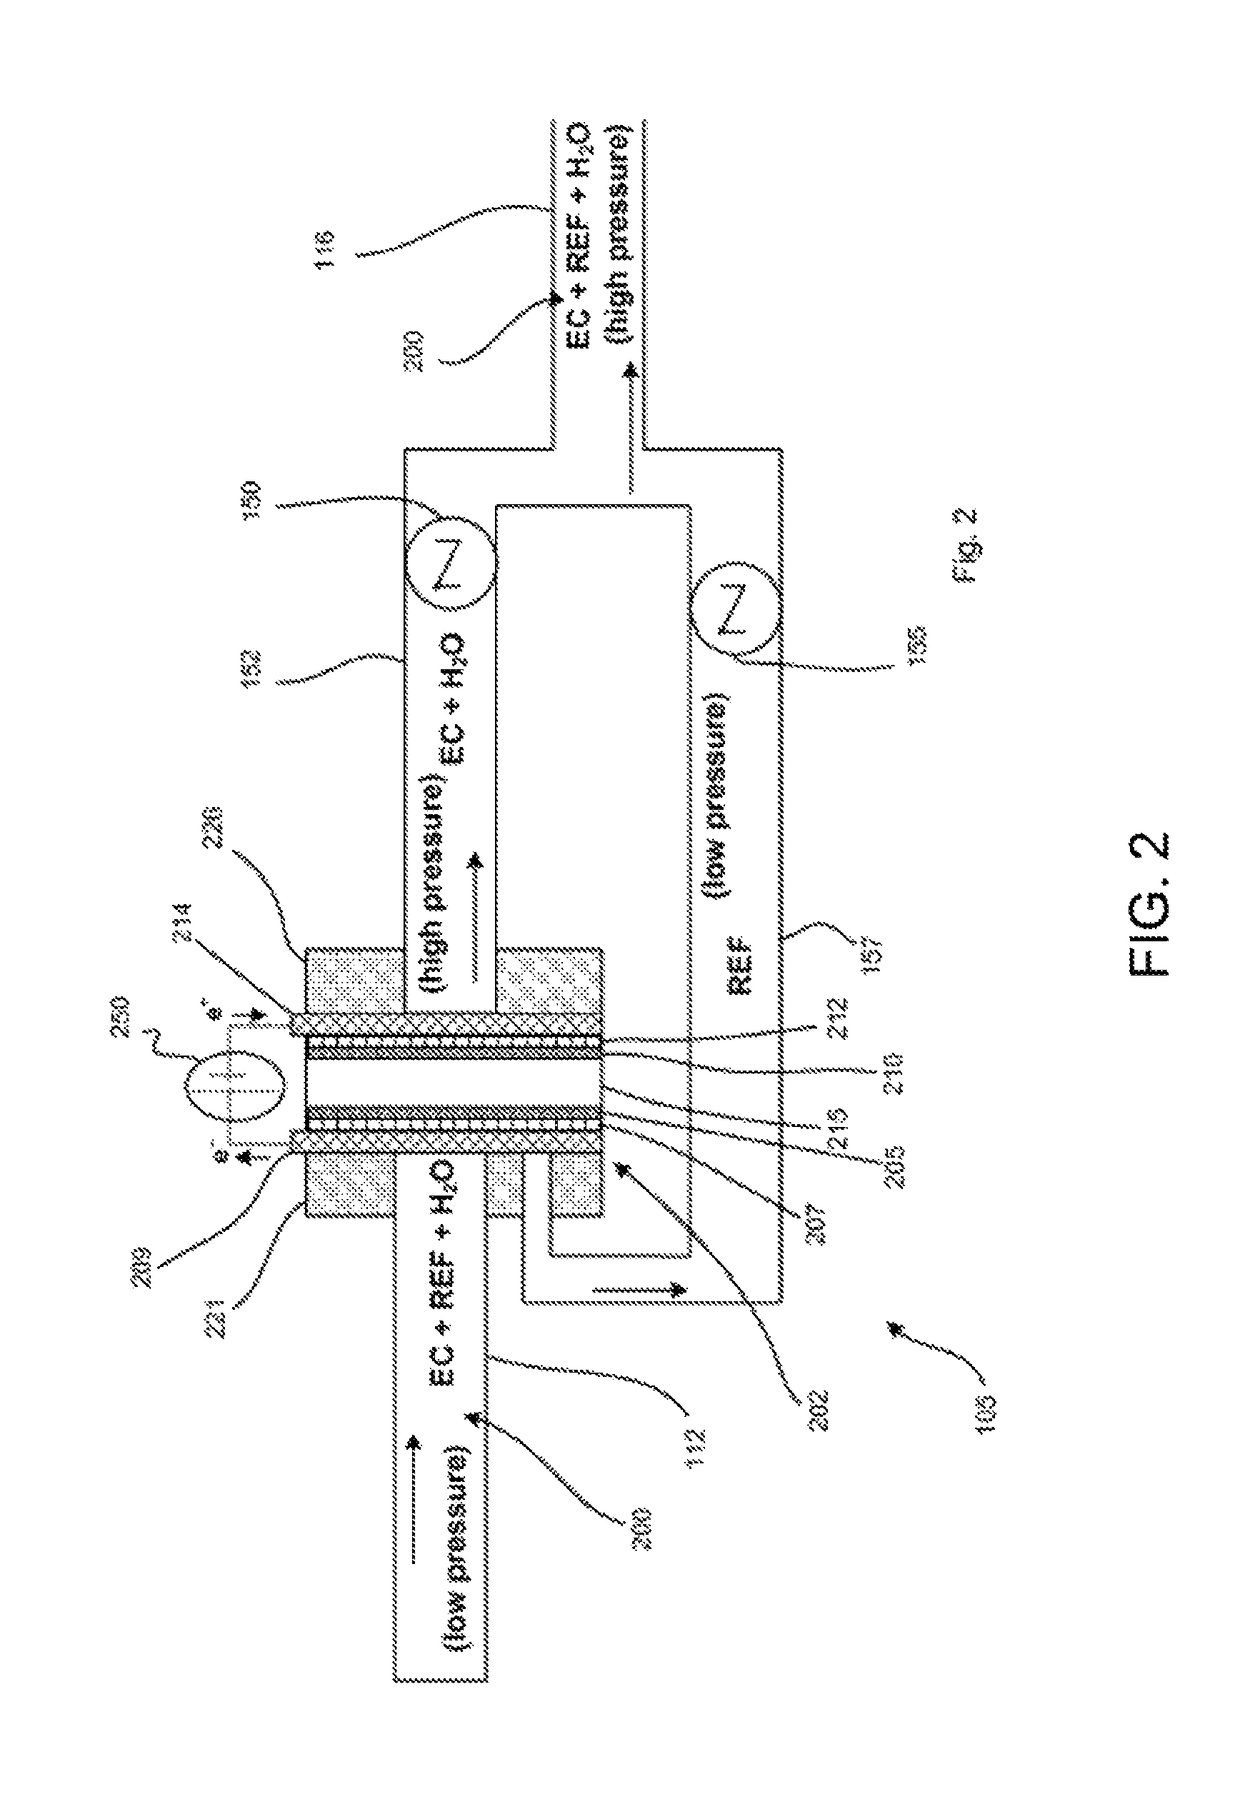 Electrochemical compressor with reactant conduit